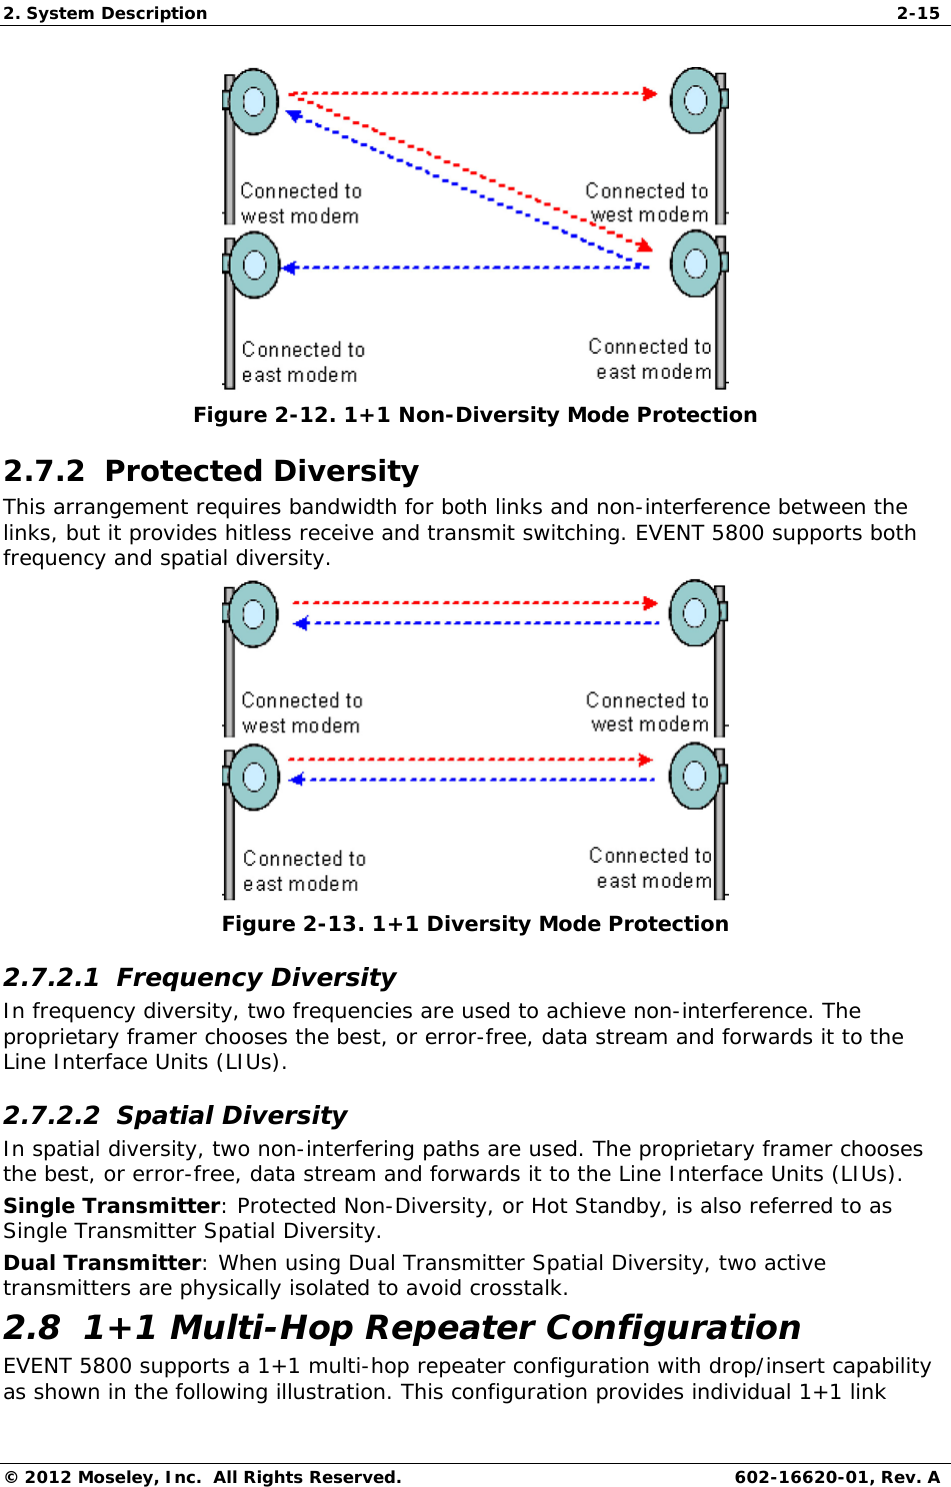 2. System Description  2-15 © 2012 Moseley, Inc.  All Rights Reserved.  602-16620-01, Rev. A  Figure 2-12. 1+1 Non-Diversity Mode Protection 2.7.2  Protected Diversity This arrangement requires bandwidth for both links and non-interference between the links, but it provides hitless receive and transmit switching. EVENT 5800 supports both frequency and spatial diversity.  Figure 2-13. 1+1 Diversity Mode Protection 2.7.2.1  Frequency Diversity In frequency diversity, two frequencies are used to achieve non-interference. The proprietary framer chooses the best, or error-free, data stream and forwards it to the Line Interface Units (LIUs). 2.7.2.2  Spatial Diversity In spatial diversity, two non-interfering paths are used. The proprietary framer chooses the best, or error-free, data stream and forwards it to the Line Interface Units (LIUs). Single Transmitter: Protected Non-Diversity, or Hot Standby, is also referred to as Single Transmitter Spatial Diversity.  Dual Transmitter: When using Dual Transmitter Spatial Diversity, two active transmitters are physically isolated to avoid crosstalk. 2.8  1+1 Multi-Hop Repeater Configuration EVENT 5800 supports a 1+1 multi-hop repeater configuration with drop/insert capability as shown in the following illustration. This configuration provides individual 1+1 link 